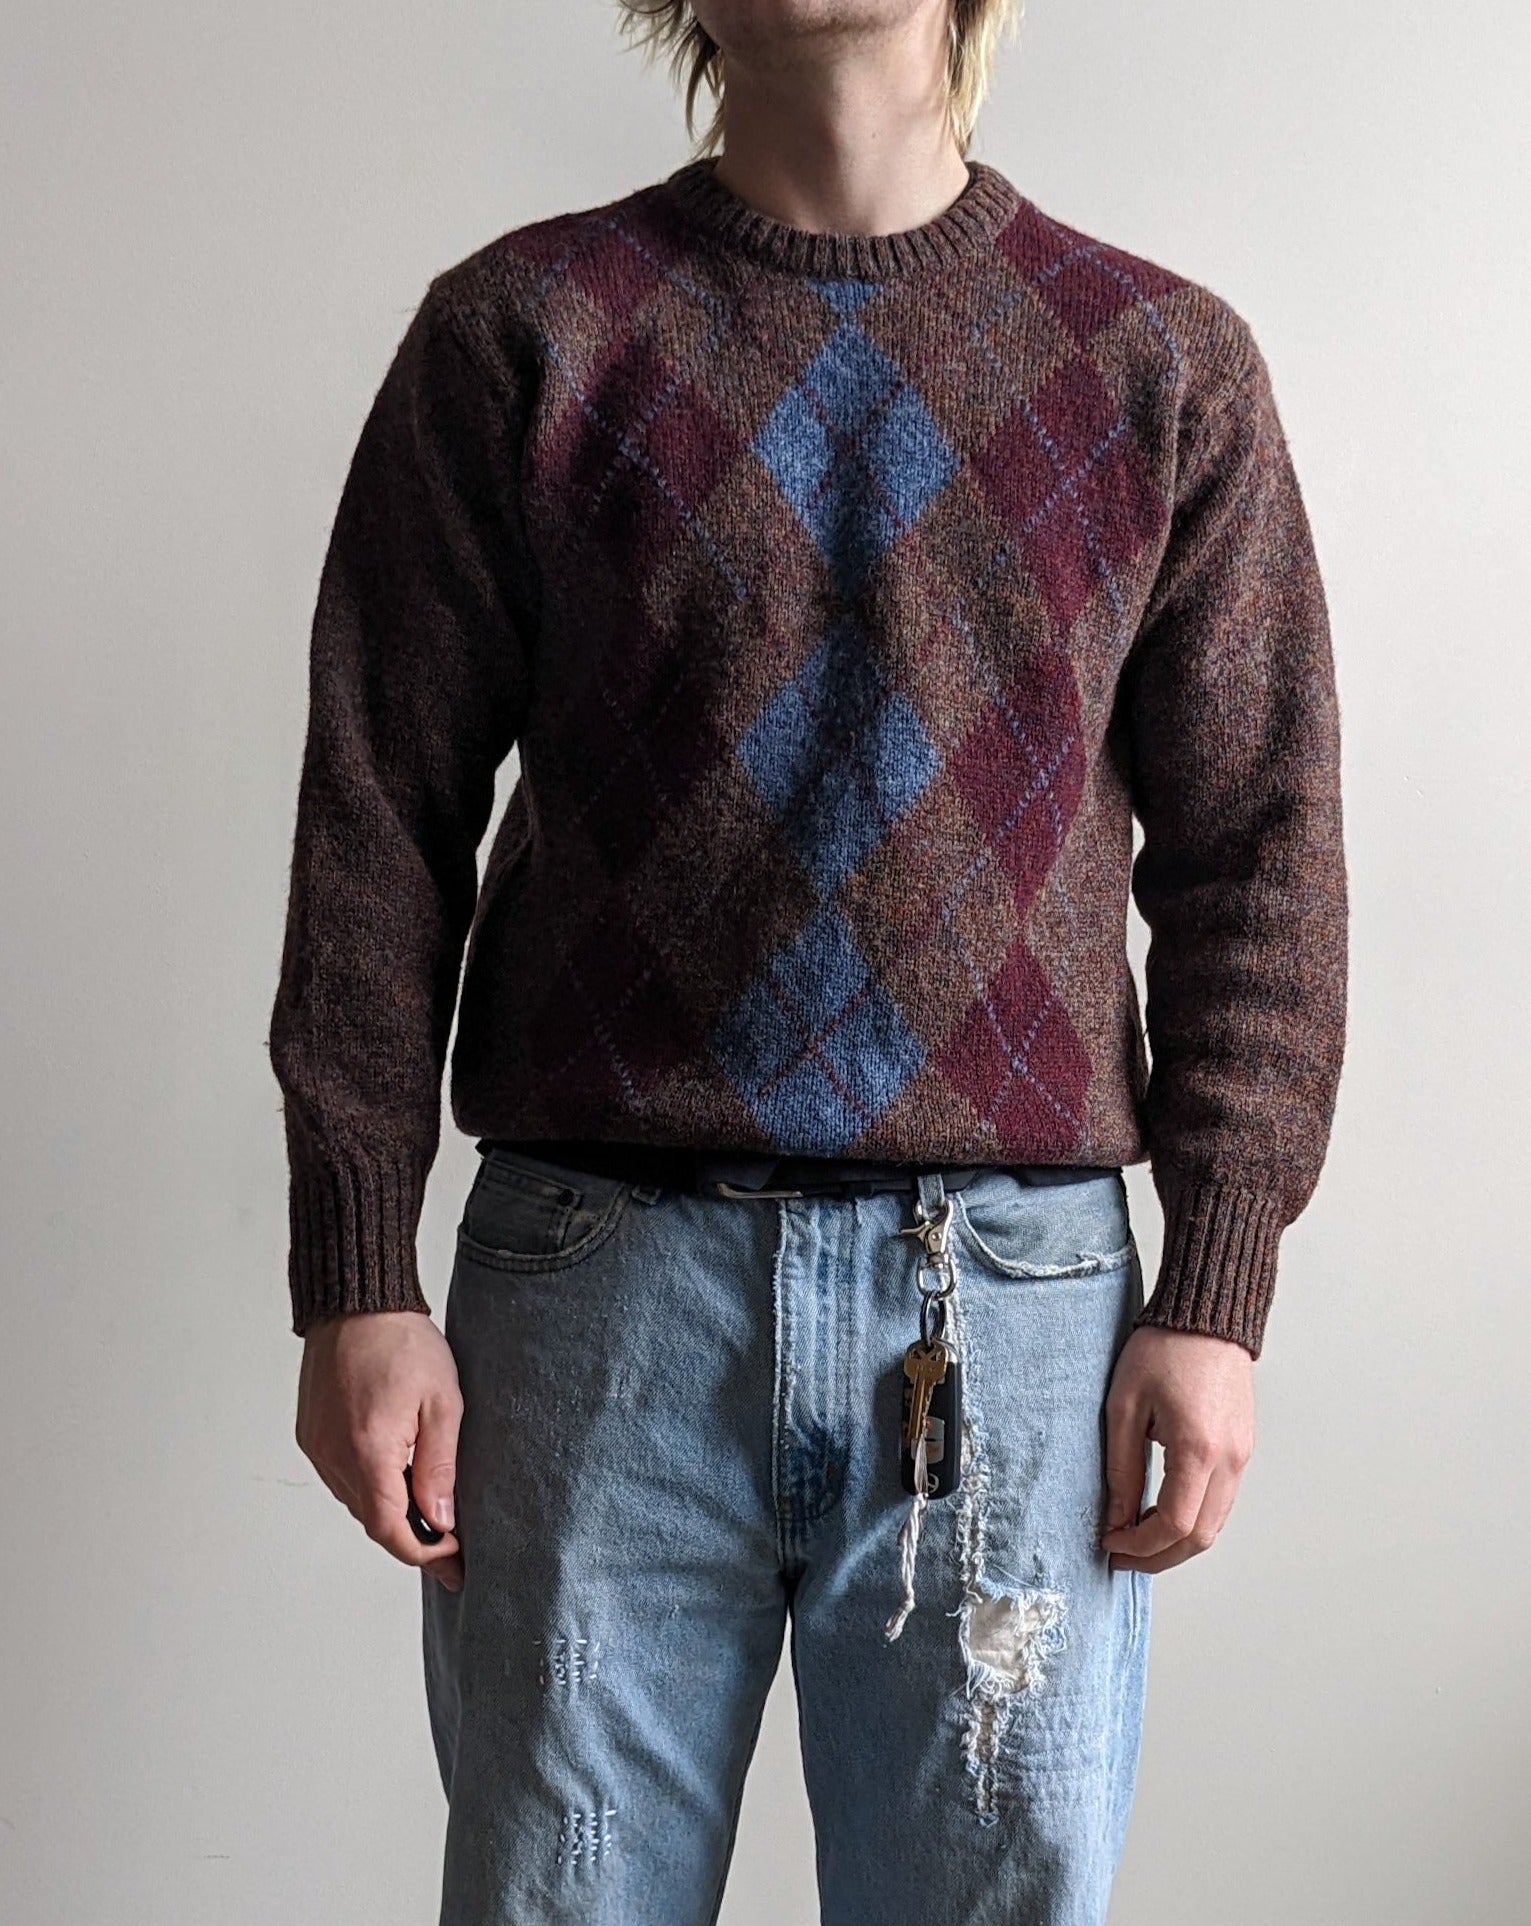 Shetland Wool Christopher Hayes Maroon and Brown Sweater (M)